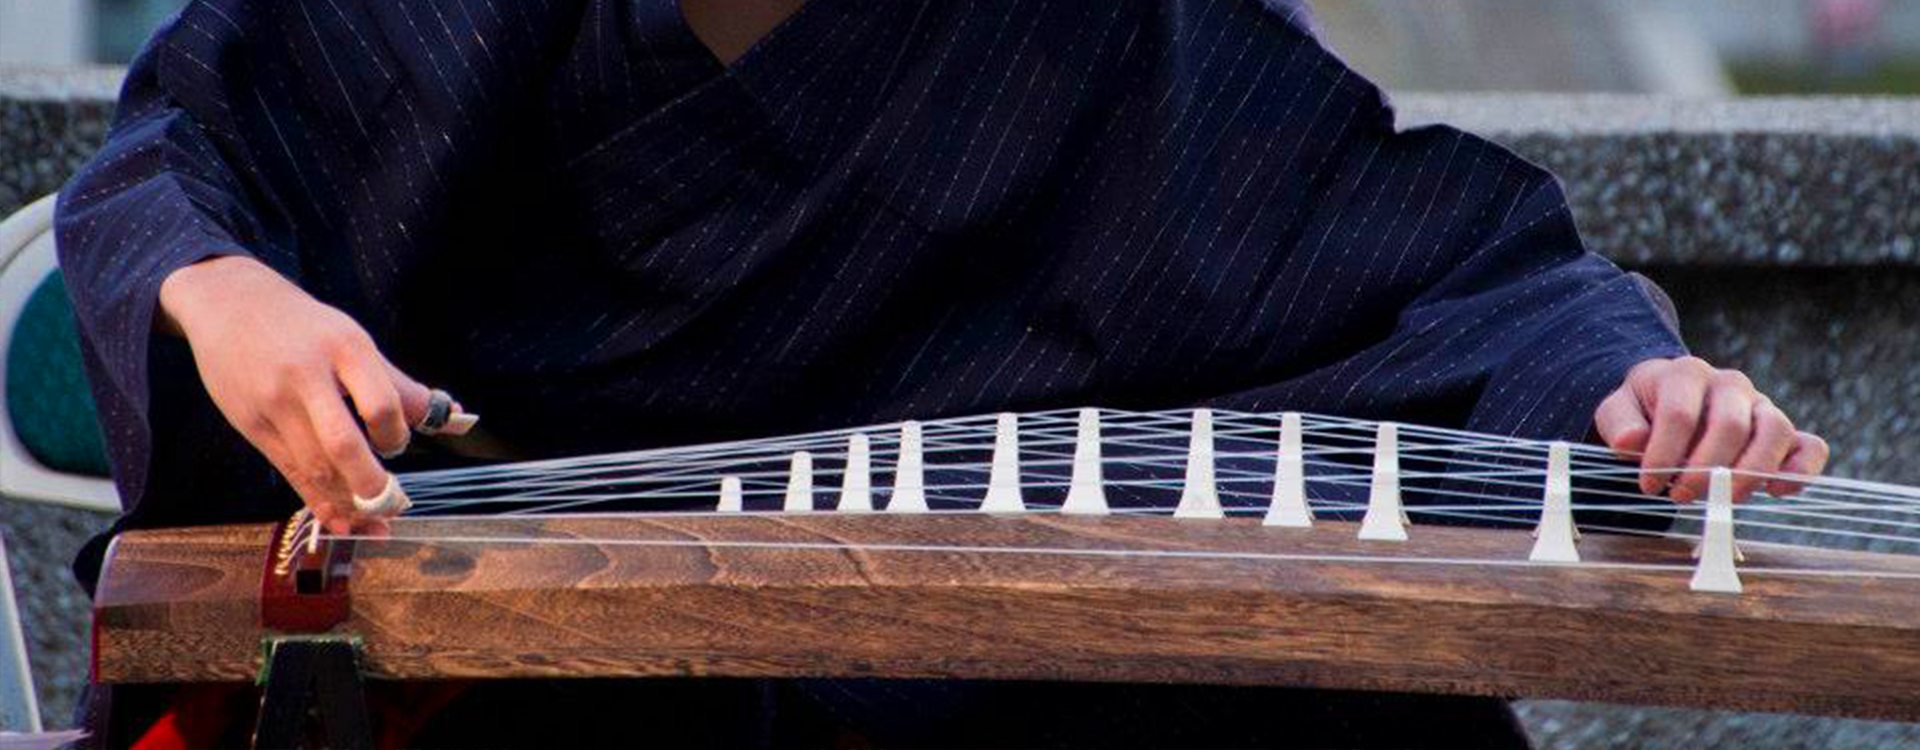 Person playing koto instrument